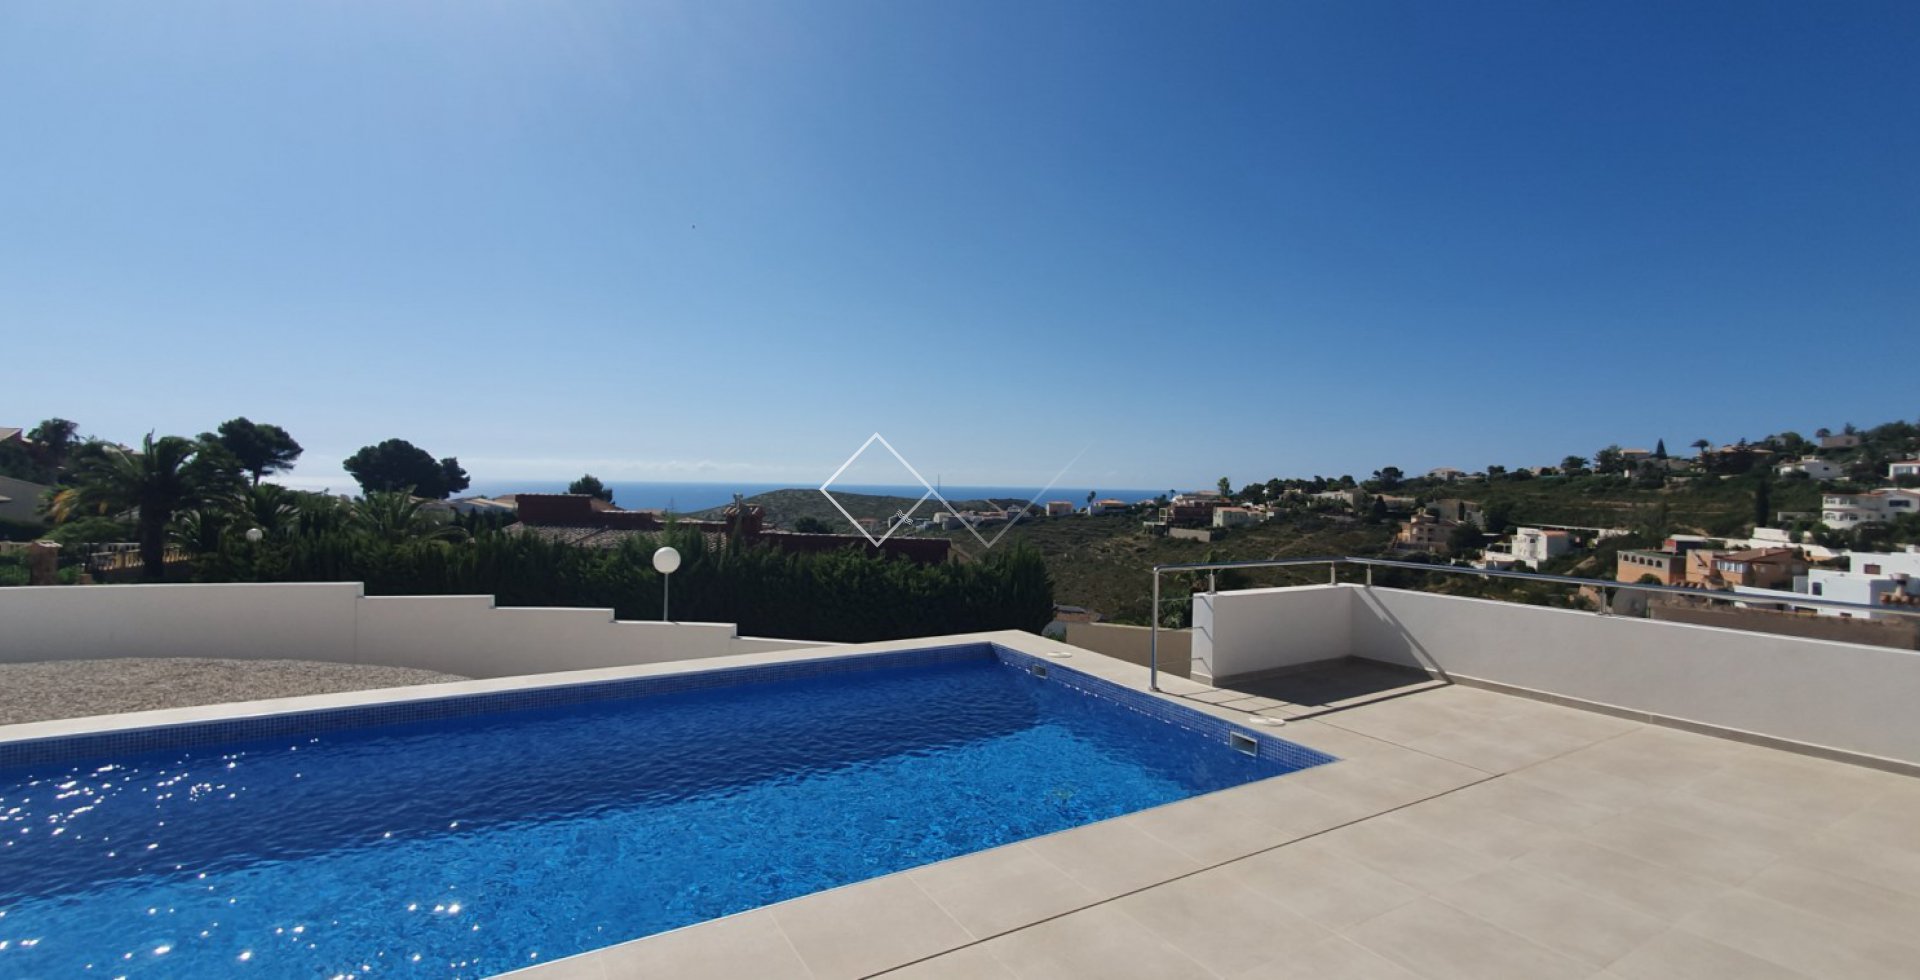 Sea Views- Modern luxury villa, located close to the beach and overlooking the Mediterranean Sea.